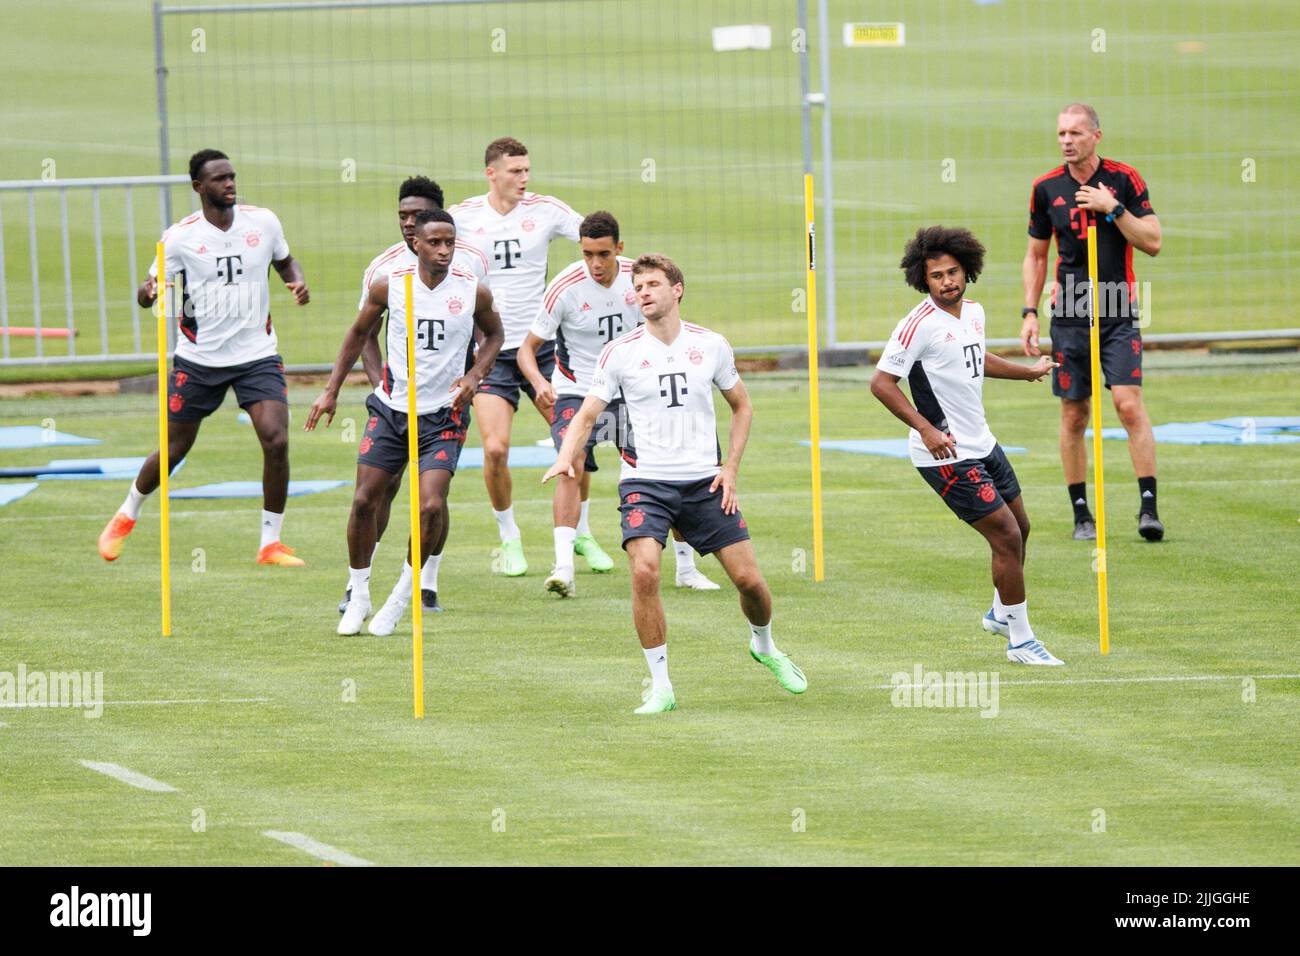 26 July 2022, Bavaria, Munich: Soccer: Bundesliga, training FC Bayern Munich before the Supercup at the training ground on Säbener Straße. Tanguy Nianzou (l-r), Alphonso Davies, Bouna Sarr, Benjamin Pavard, Jamal Musiala, Thomas Müller, and Serge Gnabry of FC Bayern München warm up. On the right is Holger Broich, fitness and rehabilitation coach of FC Bayern Munich. Photo: Matthias Balk/dpa - IMPORTANT NOTE: In accordance with the requirements of the DFL Deutsche Fußball Liga and the DFB Deutscher Fußball-Bund, it is prohibited to use or have used photographs taken in the stadium and/or of the Stock Photo